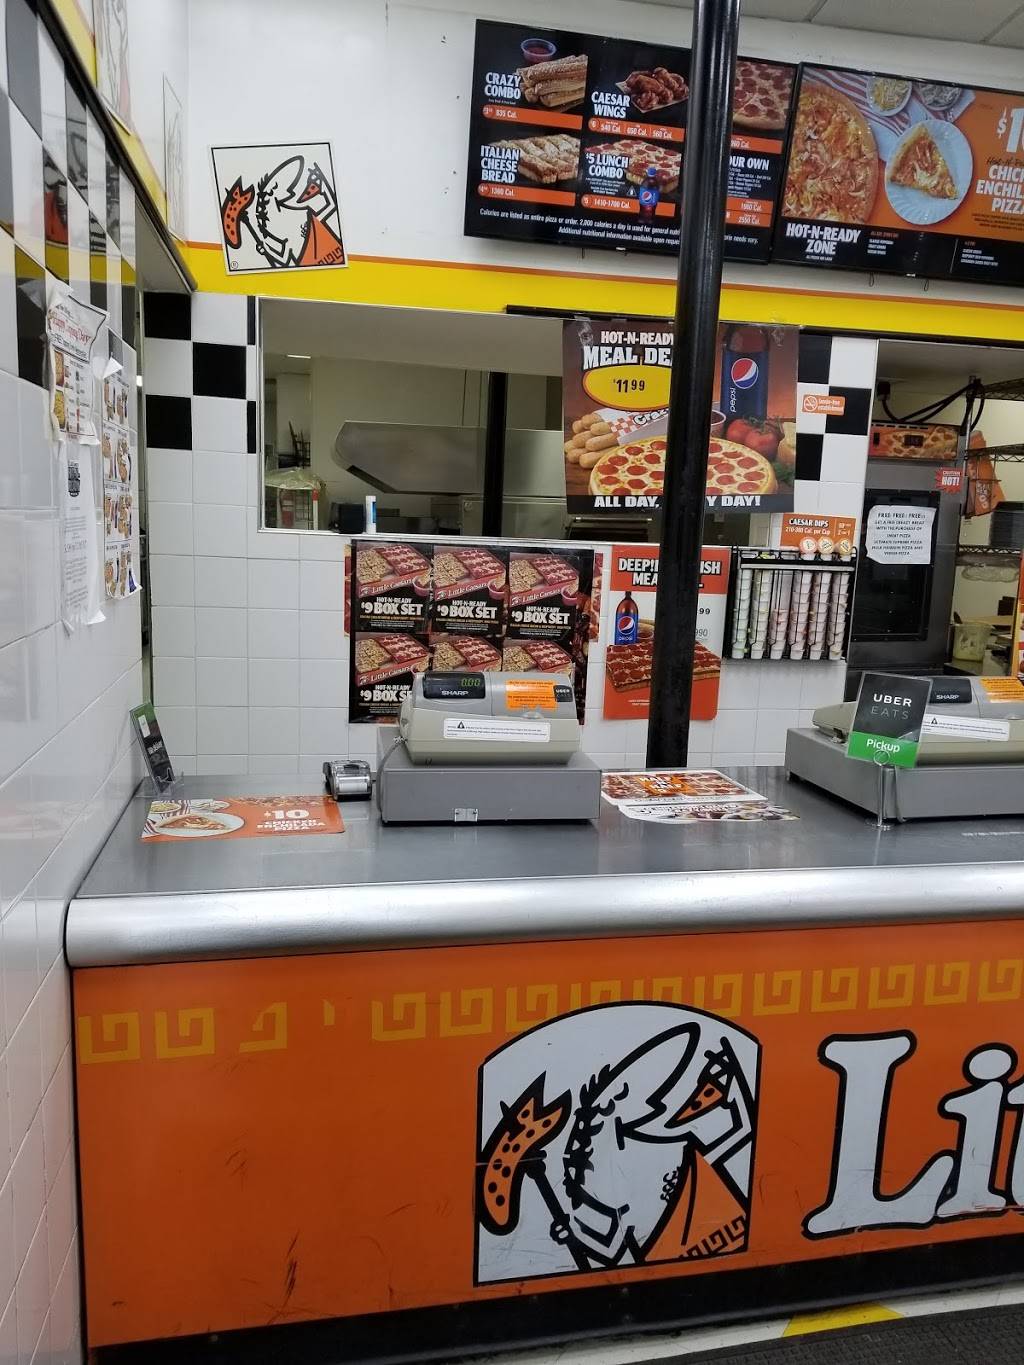 Little Caesars Pizza | meal takeaway | 4 W Mount Eden Ave, Bronx, NY 10452, USA | 3475909888 OR +1 347-590-9888